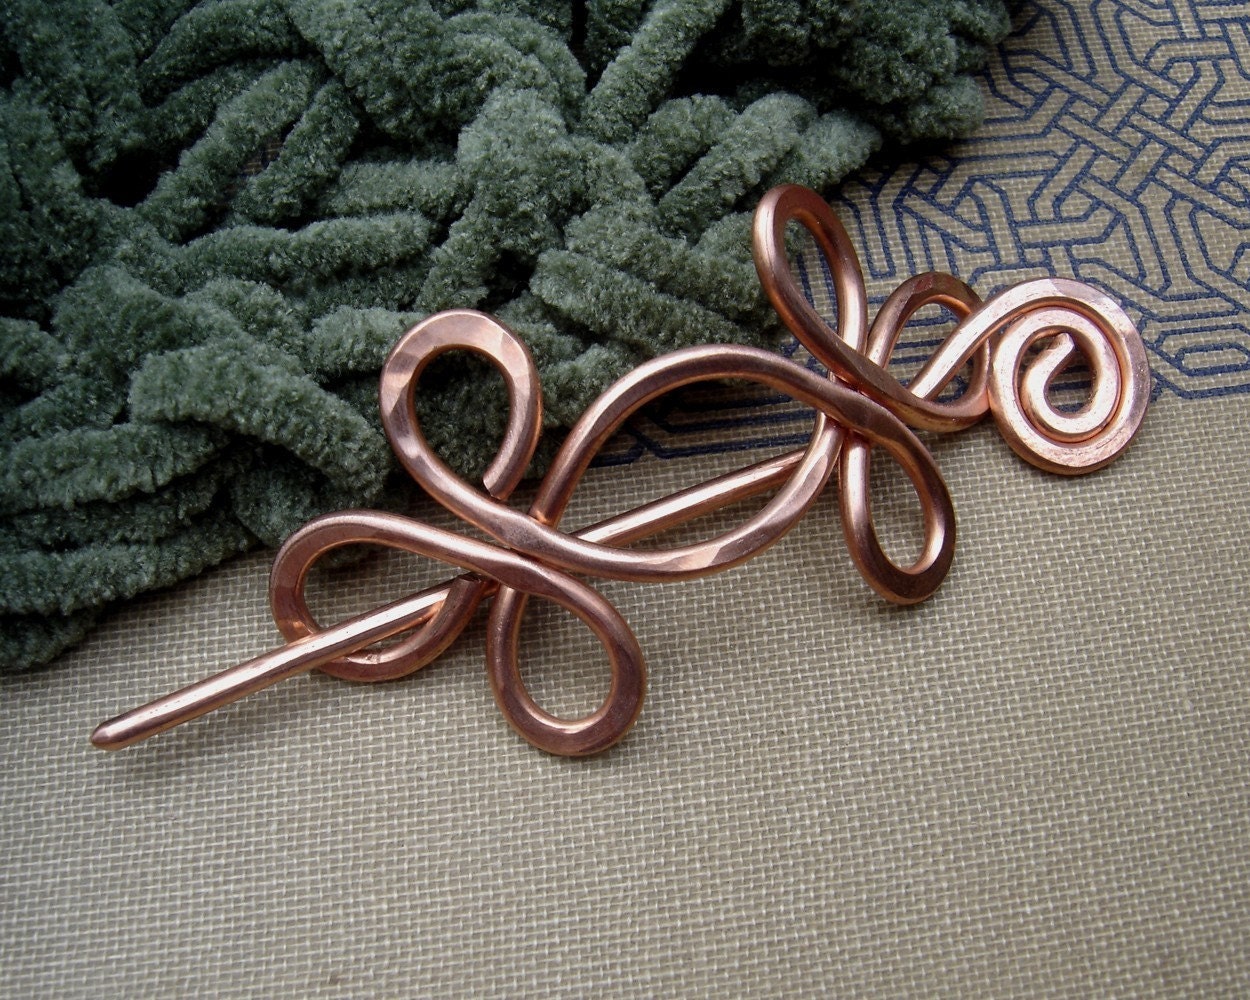 10 Copper Headpins Wire Wrapped Loop End Head Pins Handcrafted